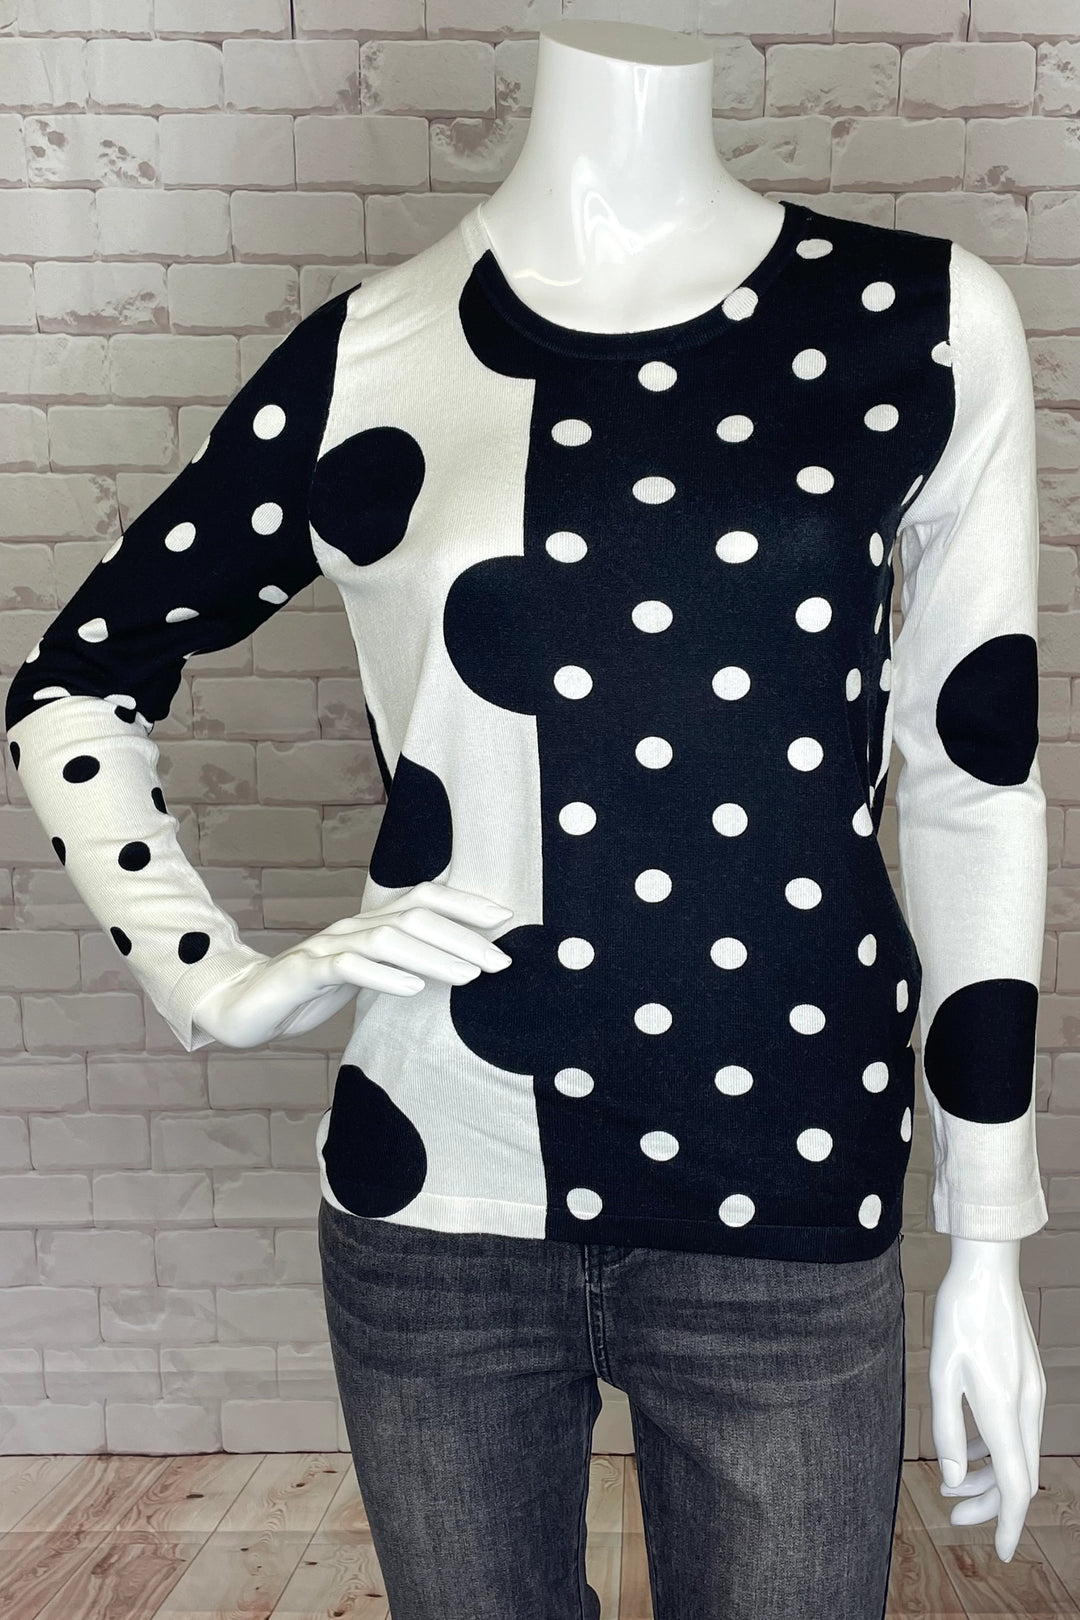 This lightweight, playful sweater features black and white dots of joy that will have you dazzling! 